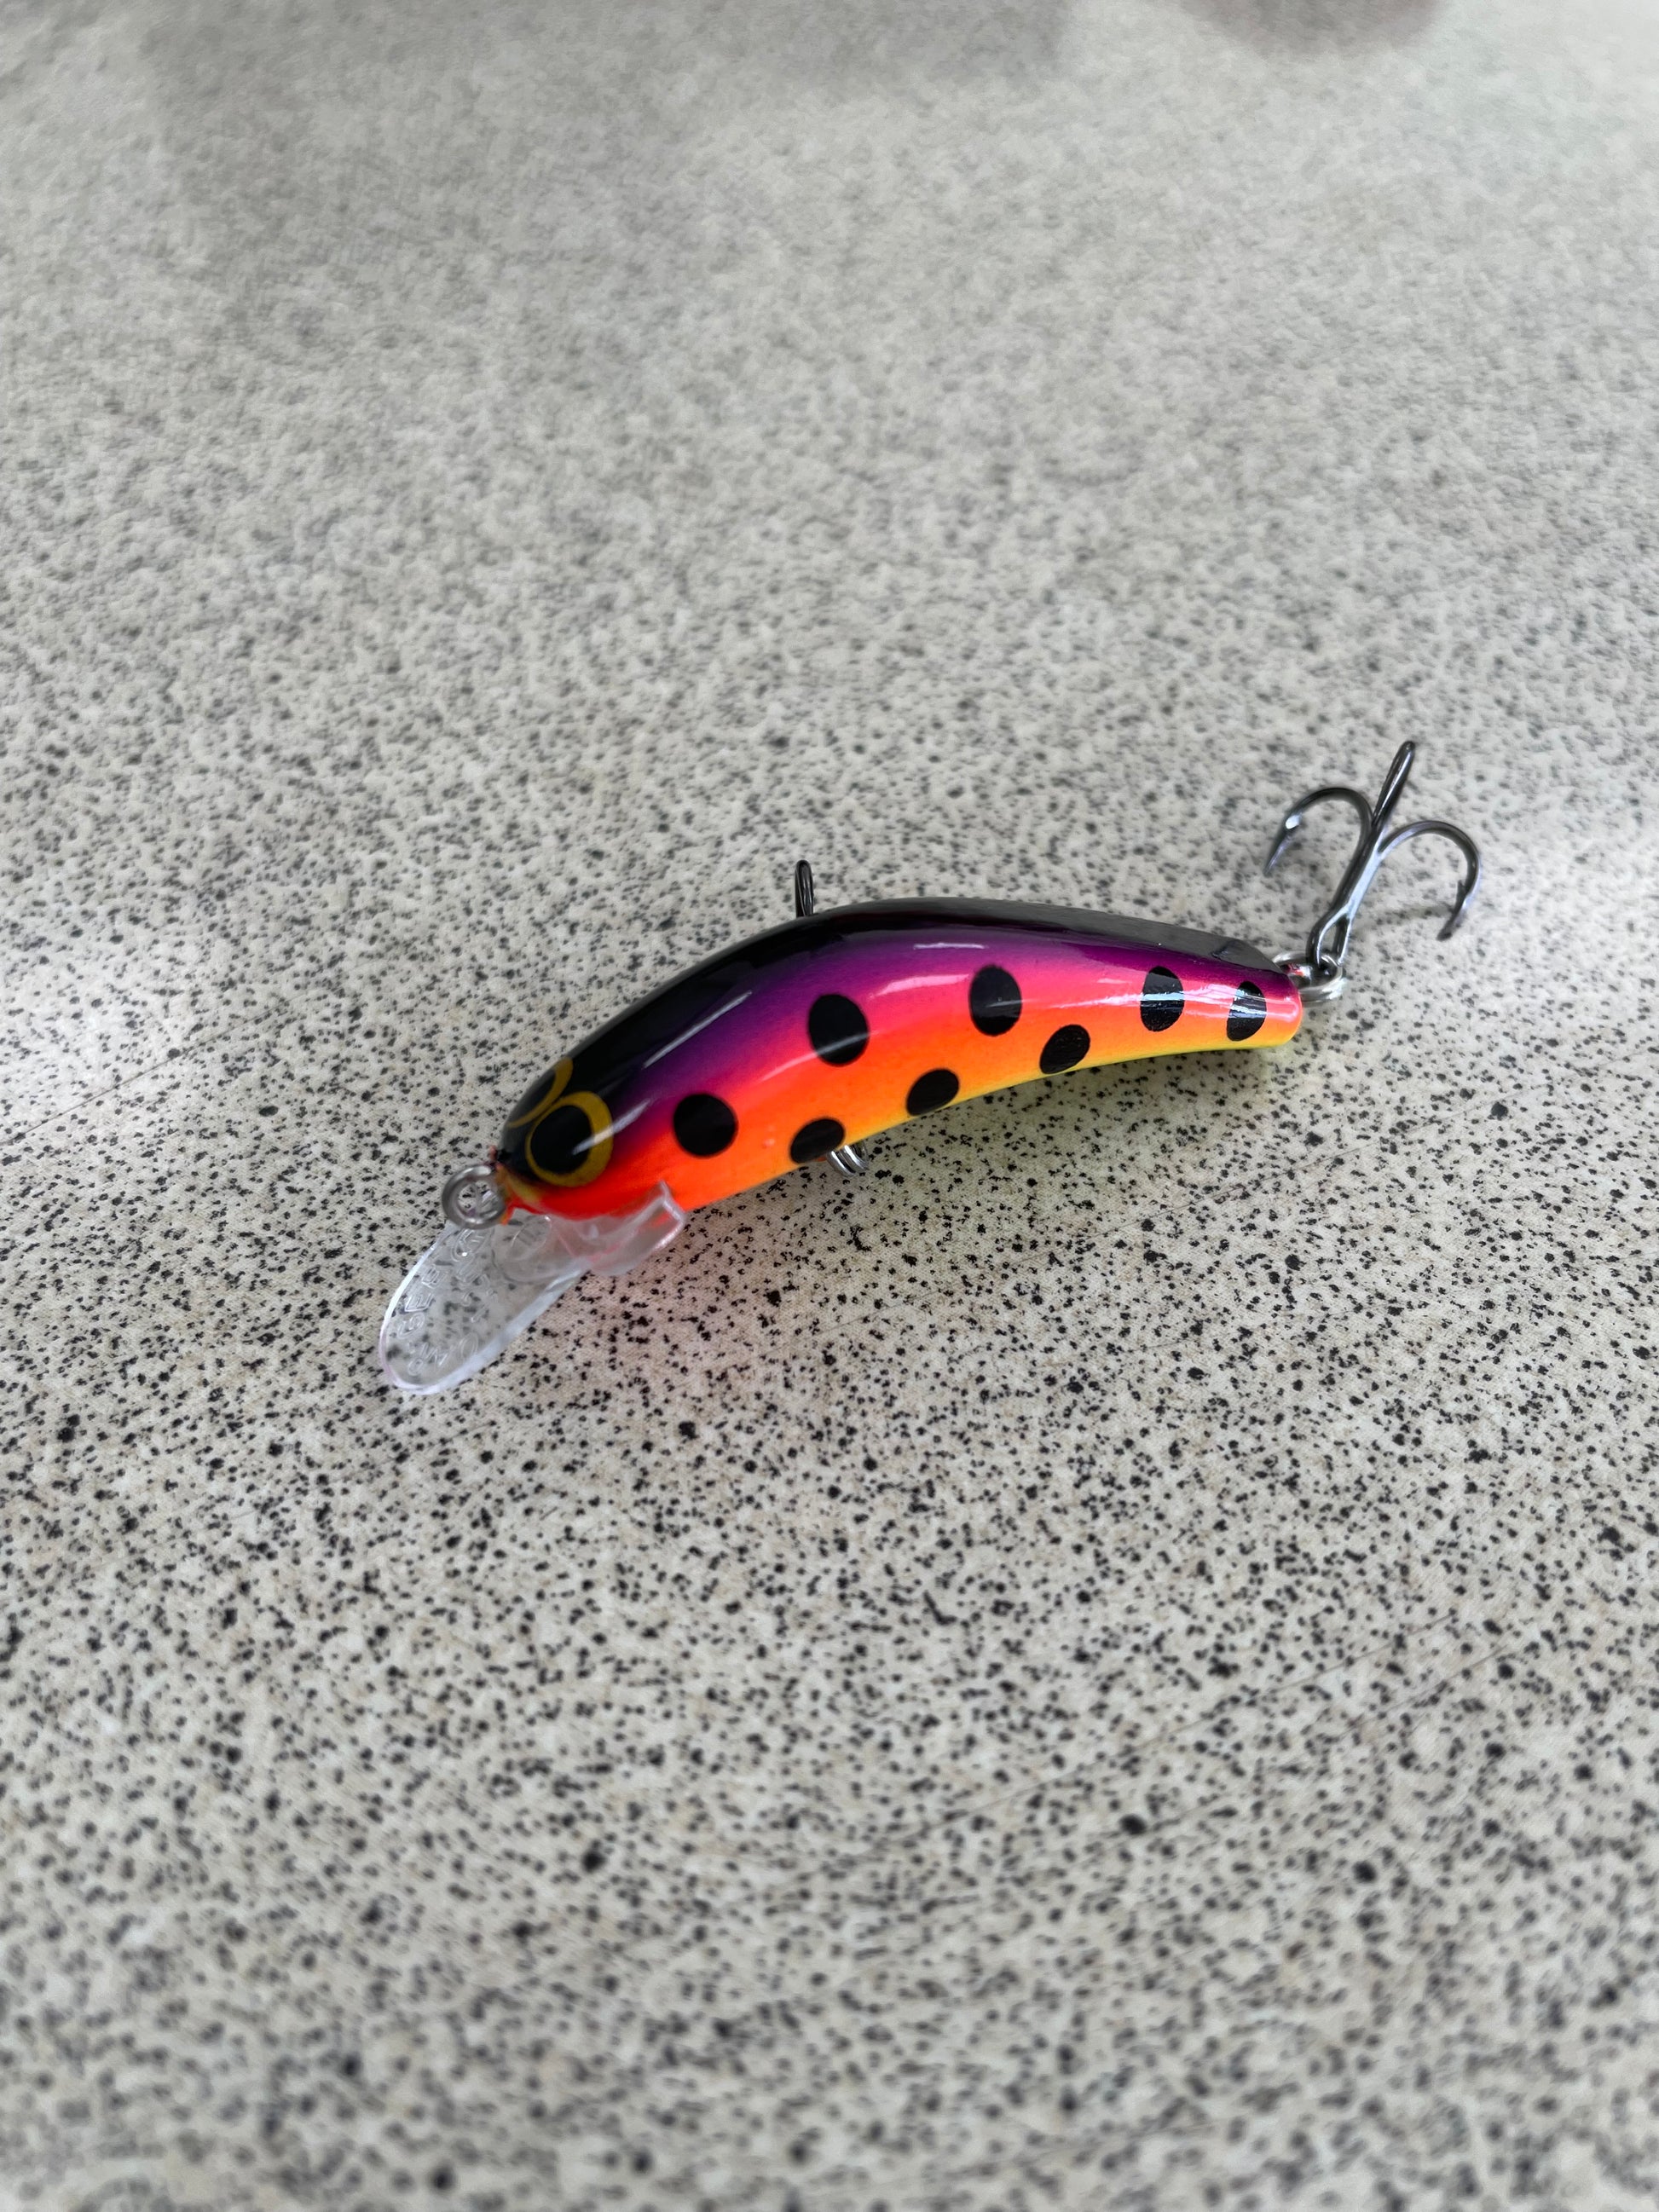 Oar-Gee Lures 'Lil' Ripper - YOV – Trophy Trout Lures and Fly Fishing